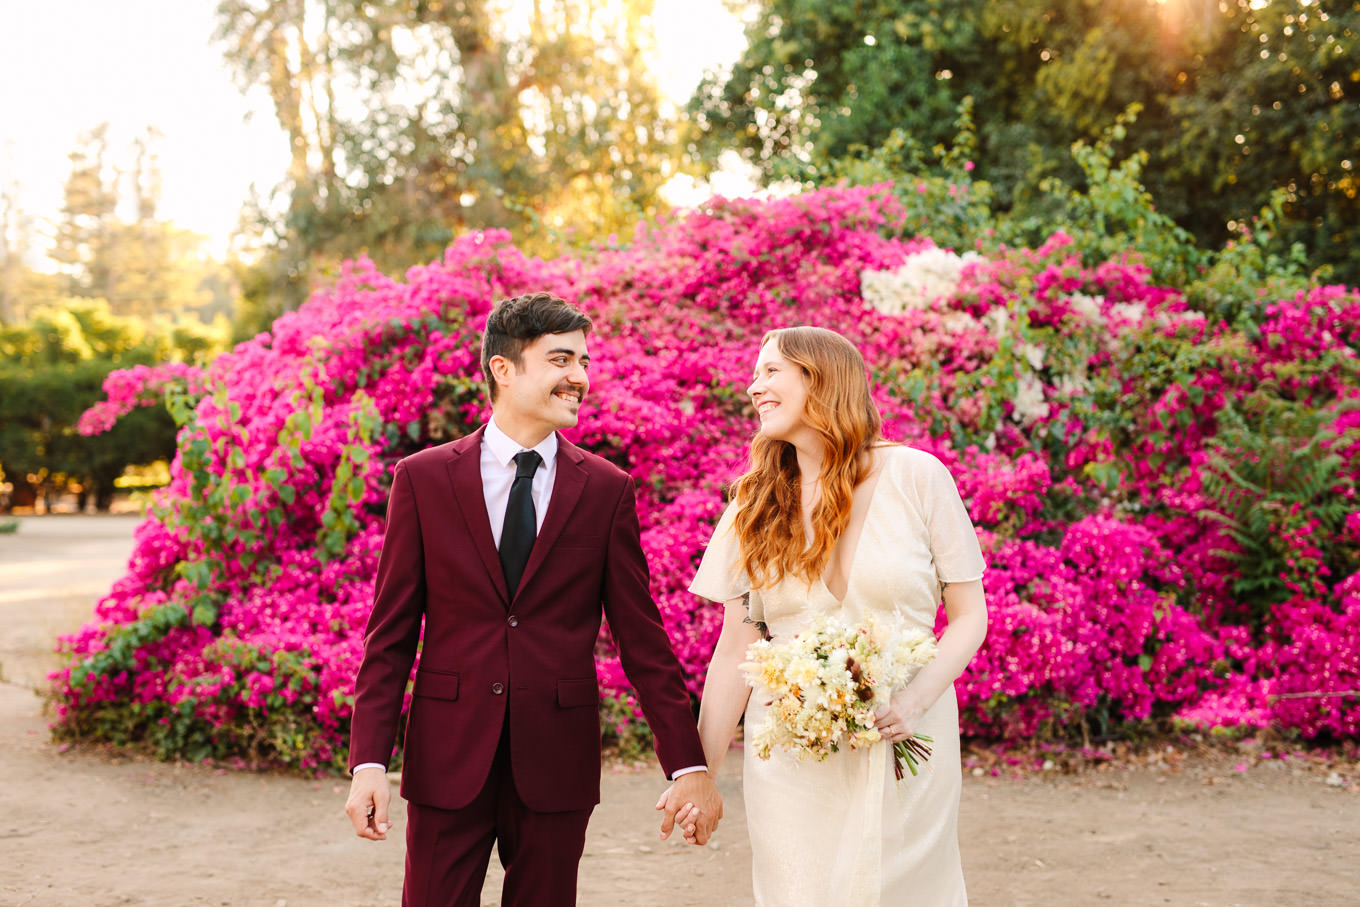 Couple walking away from lush bougainvillea | Los Angeles Arboretum Elopement | Colorful and elevated wedding photography for fun-loving couples in Southern California | #LosAngelesElopement #elopement #LAarboretum #LAskyline #elopementphotos   Source: Mary Costa Photography | Los Angeles